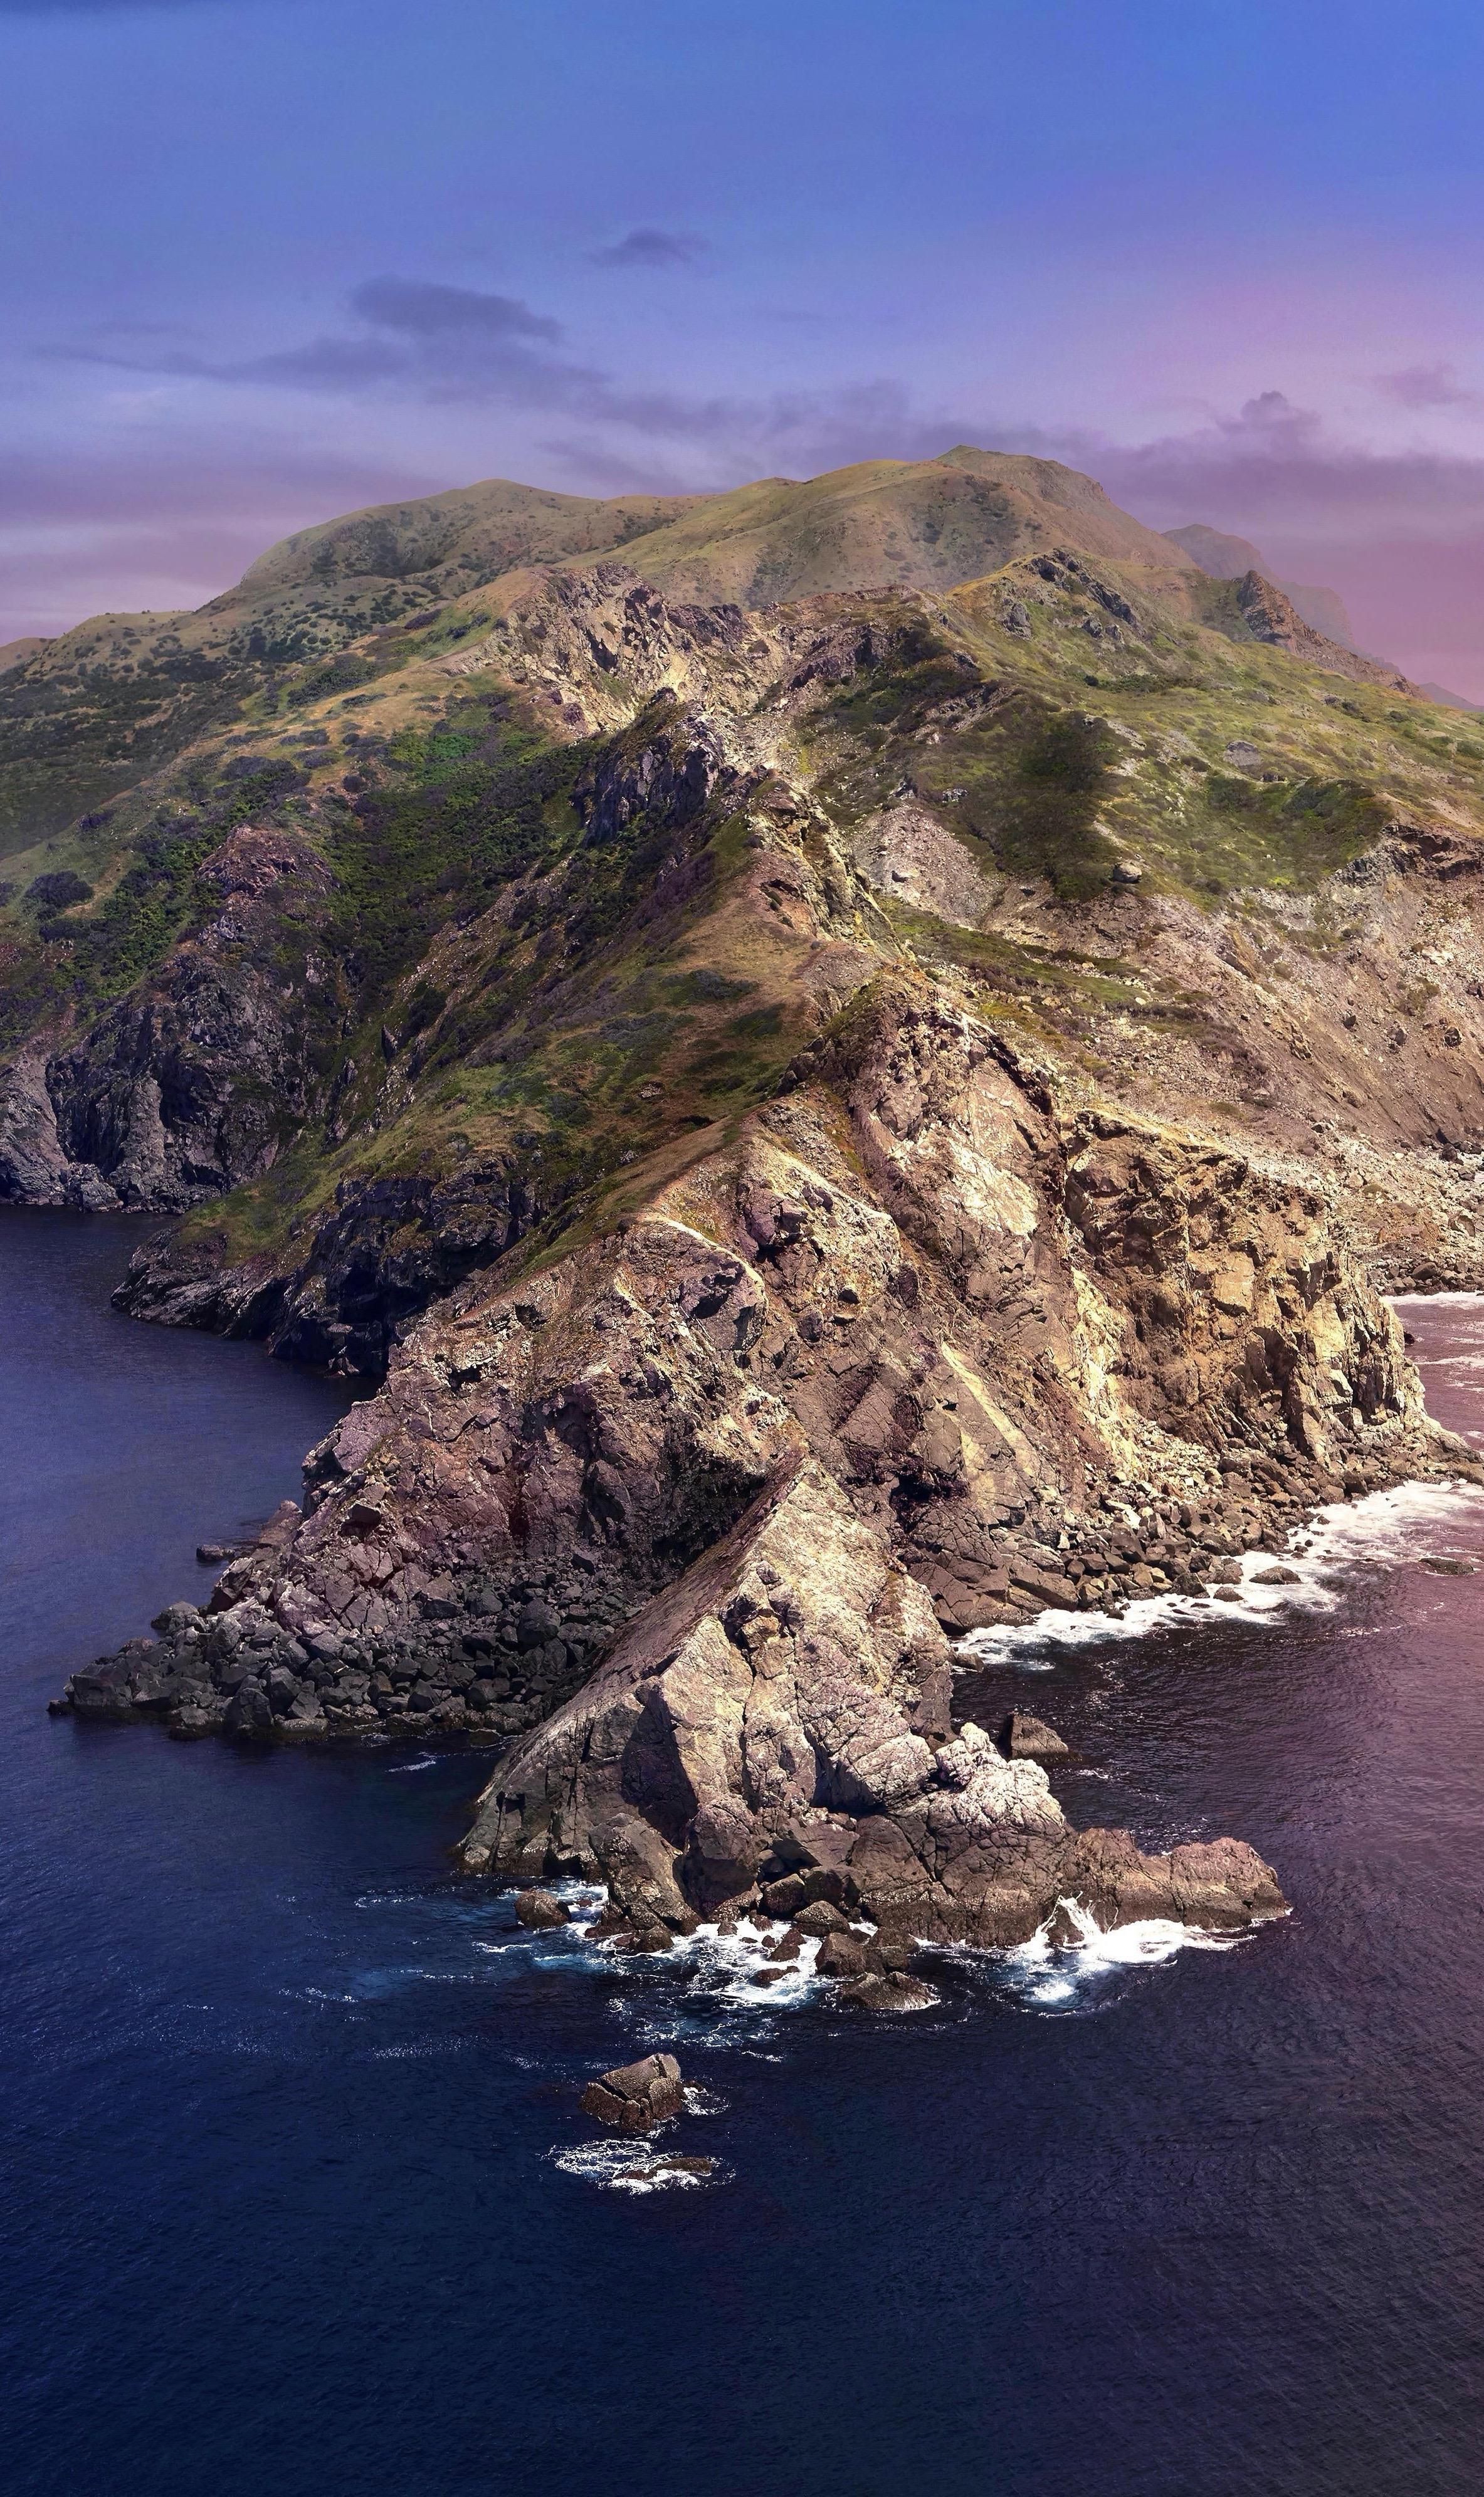 Macos Catalina Early Morning Wallpaper For iPhone Or Android In